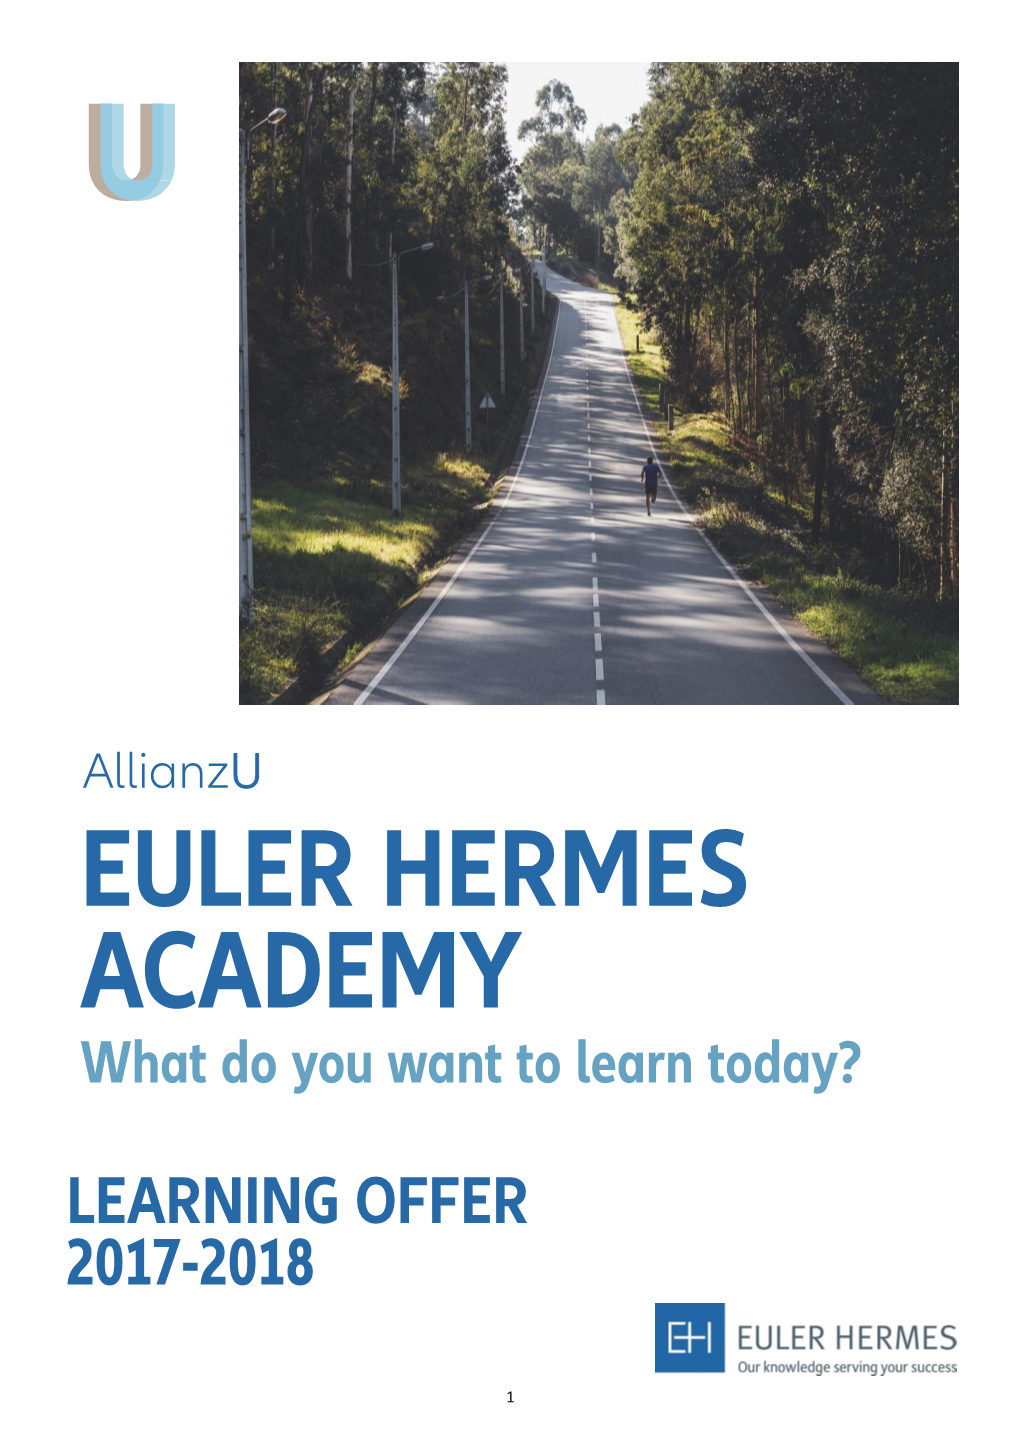 EULER HERMES ACADEMY What Do You Want to Learn Today? LEARNING OFFER